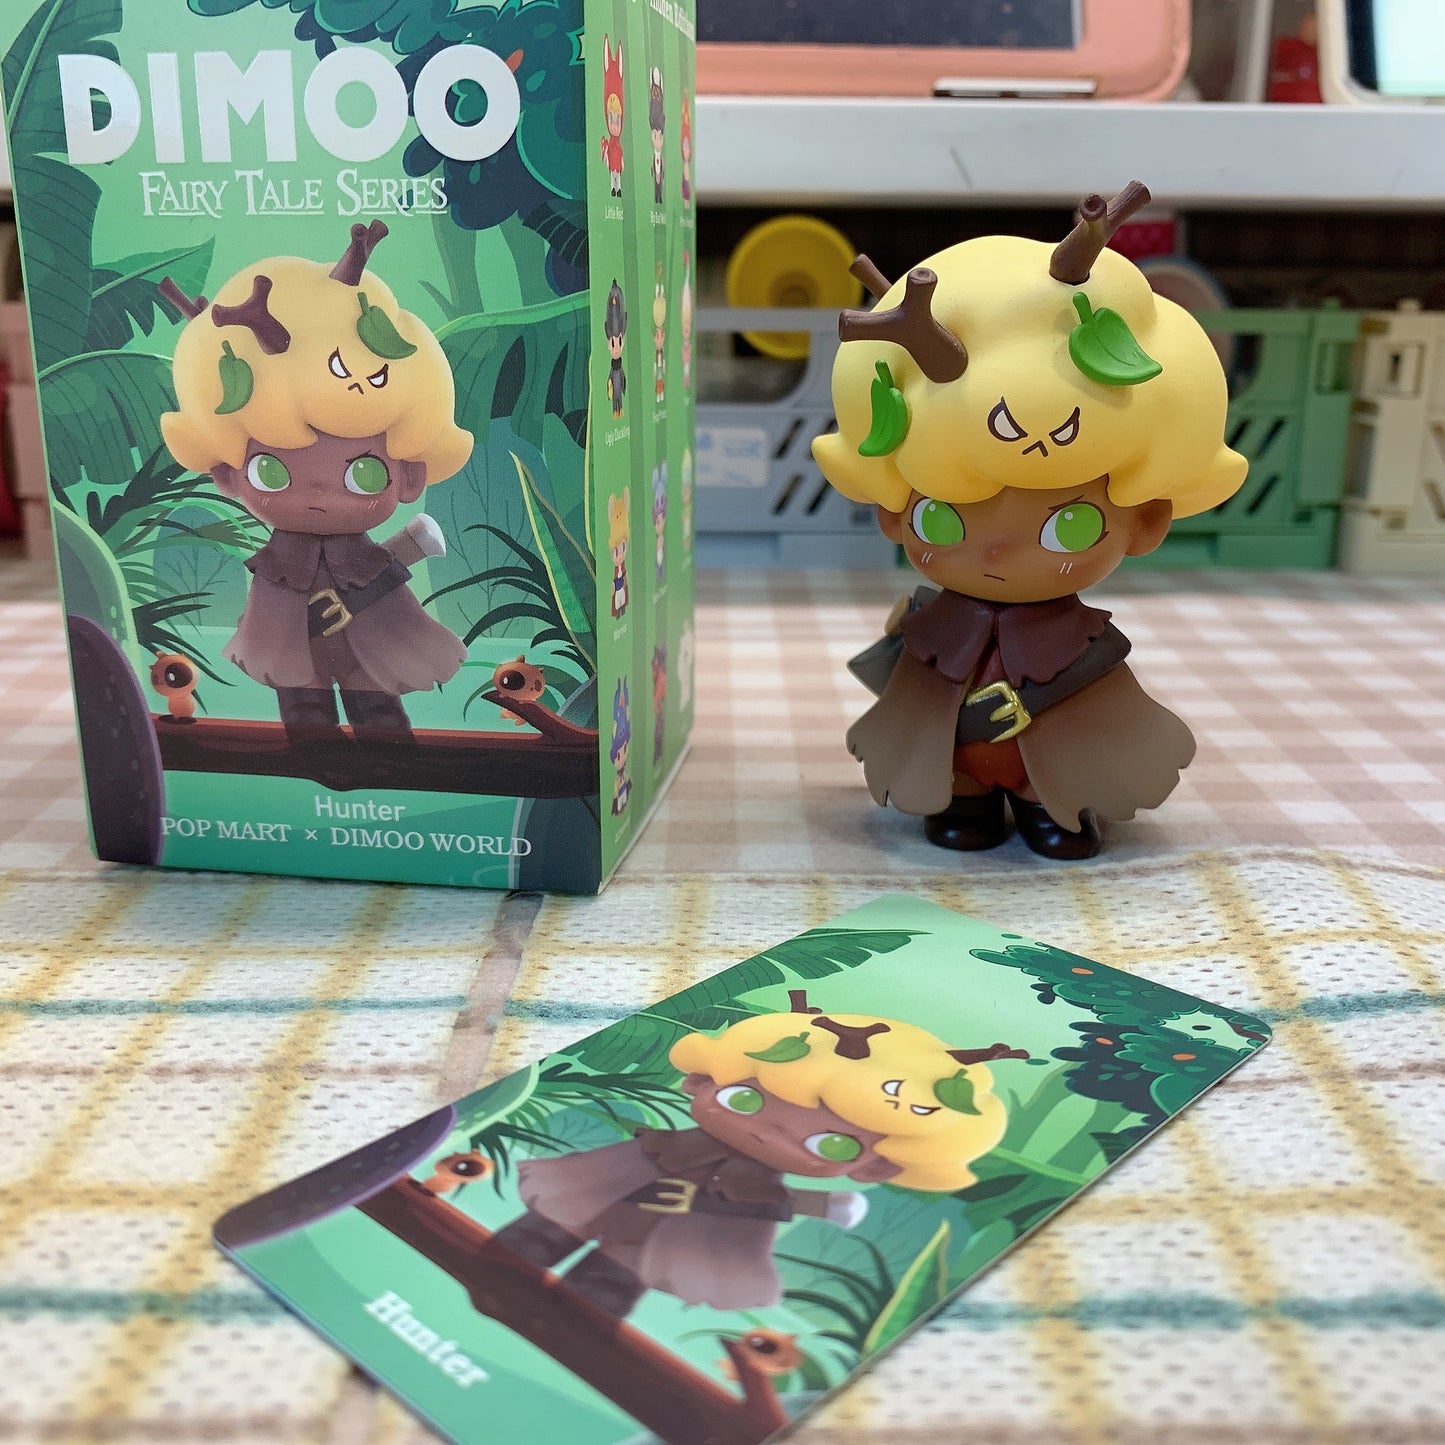 【PRELOVED and SALE 】POPMART Dimoo blind box toy Fairy Tale series Hunter